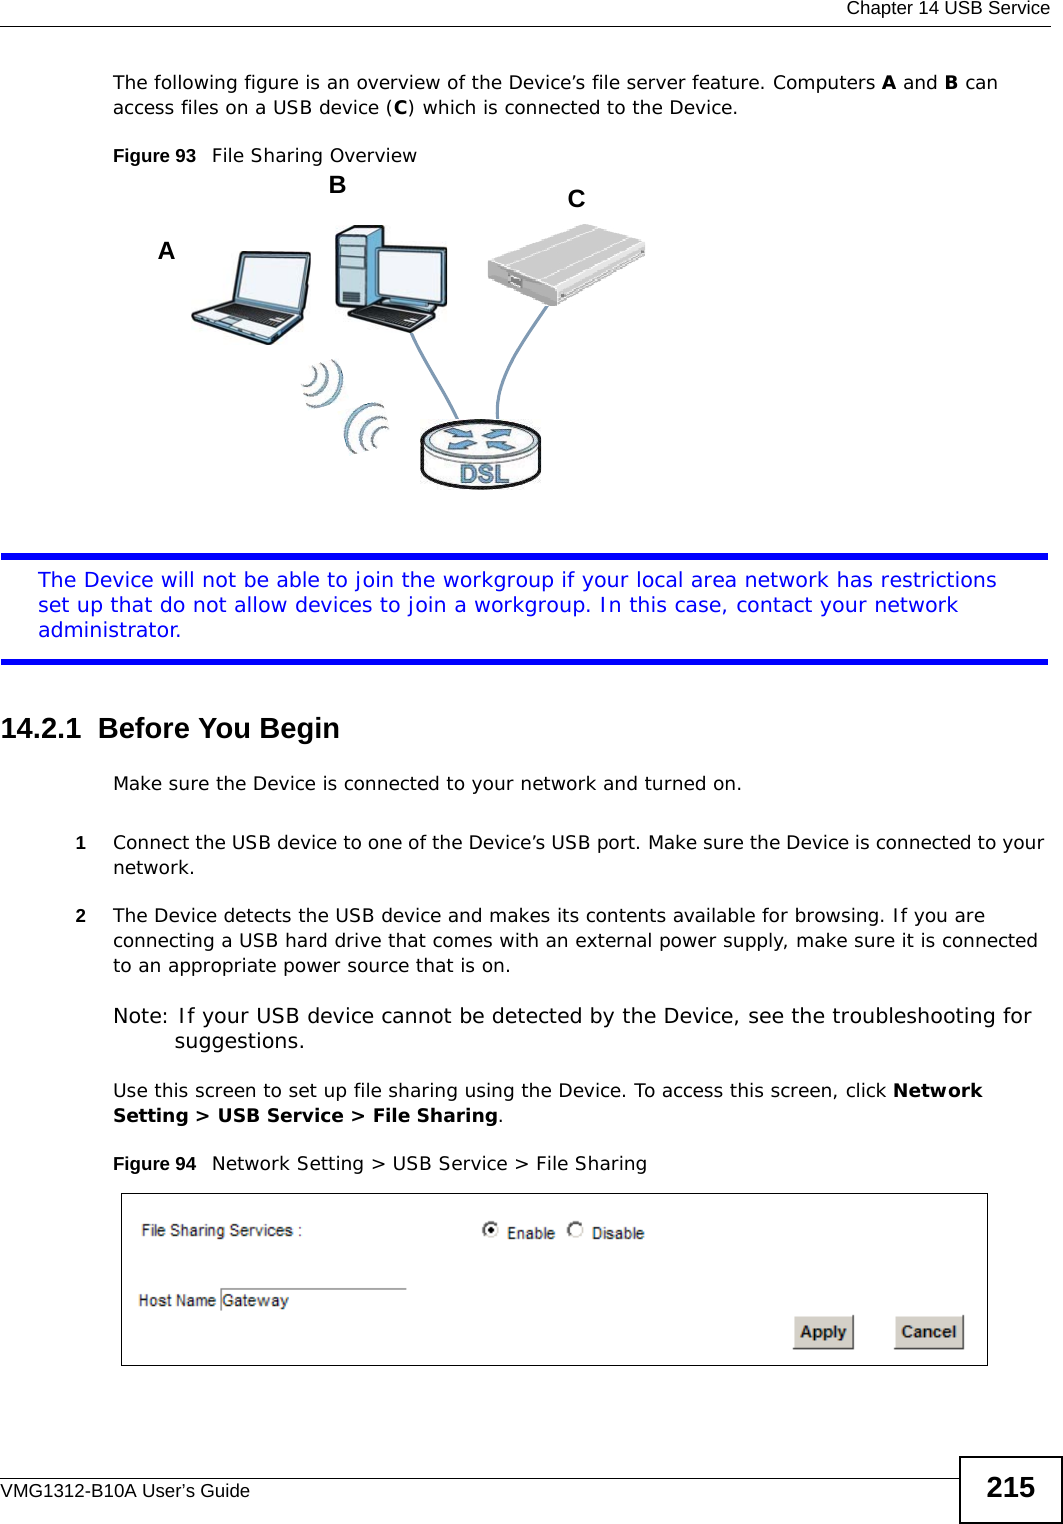  Chapter 14 USB ServiceVMG1312-B10A User’s Guide 215The following figure is an overview of the Device’s file server feature. Computers A and B can access files on a USB device (C) which is connected to the Device.Figure 93   File Sharing OverviewThe Device will not be able to join the workgroup if your local area network has restrictions set up that do not allow devices to join a workgroup. In this case, contact your network administrator.14.2.1  Before You BeginMake sure the Device is connected to your network and turned on.1Connect the USB device to one of the Device’s USB port. Make sure the Device is connected to your network.2The Device detects the USB device and makes its contents available for browsing. If you are connecting a USB hard drive that comes with an external power supply, make sure it is connected to an appropriate power source that is on.Note: If your USB device cannot be detected by the Device, see the troubleshooting for suggestions. Use this screen to set up file sharing using the Device. To access this screen, click Network Setting &gt; USB Service &gt; File Sharing.Figure 94   Network Setting &gt; USB Service &gt; File SharingABC